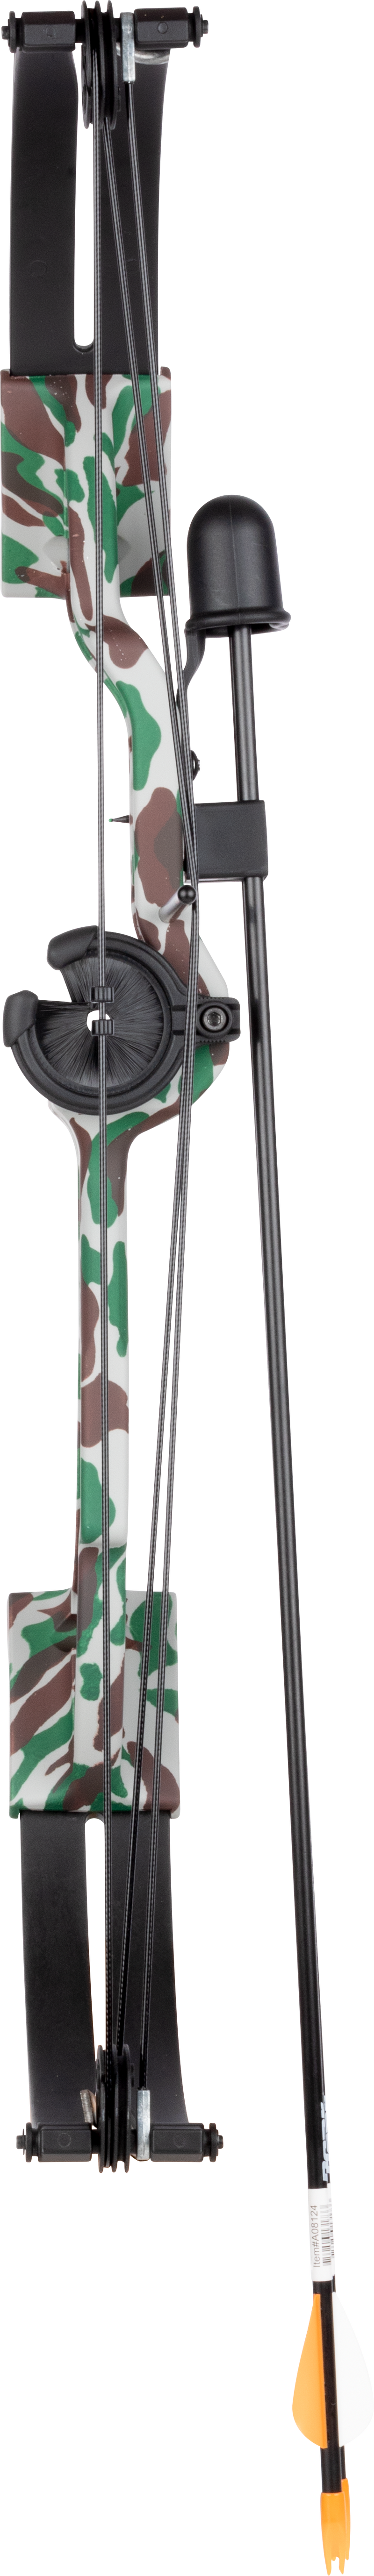 Bear Brave Bow with Biscuit - Camo Youth Compound Bow - Youth_9